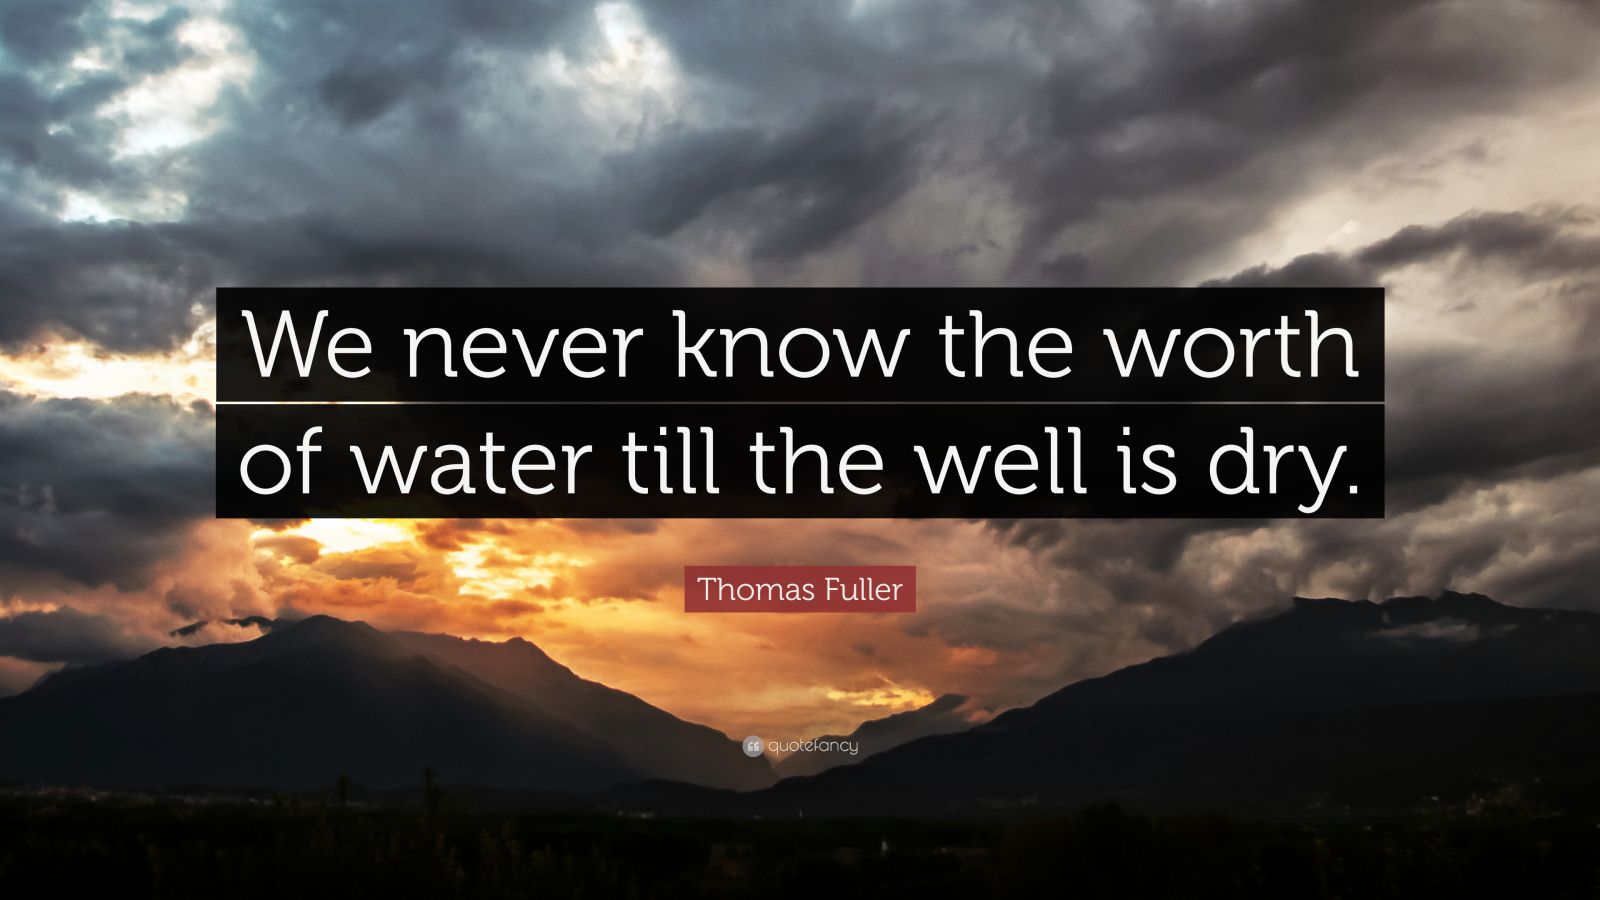 Thomas Fuller Quote: “We never know the worth of water till the well is ...